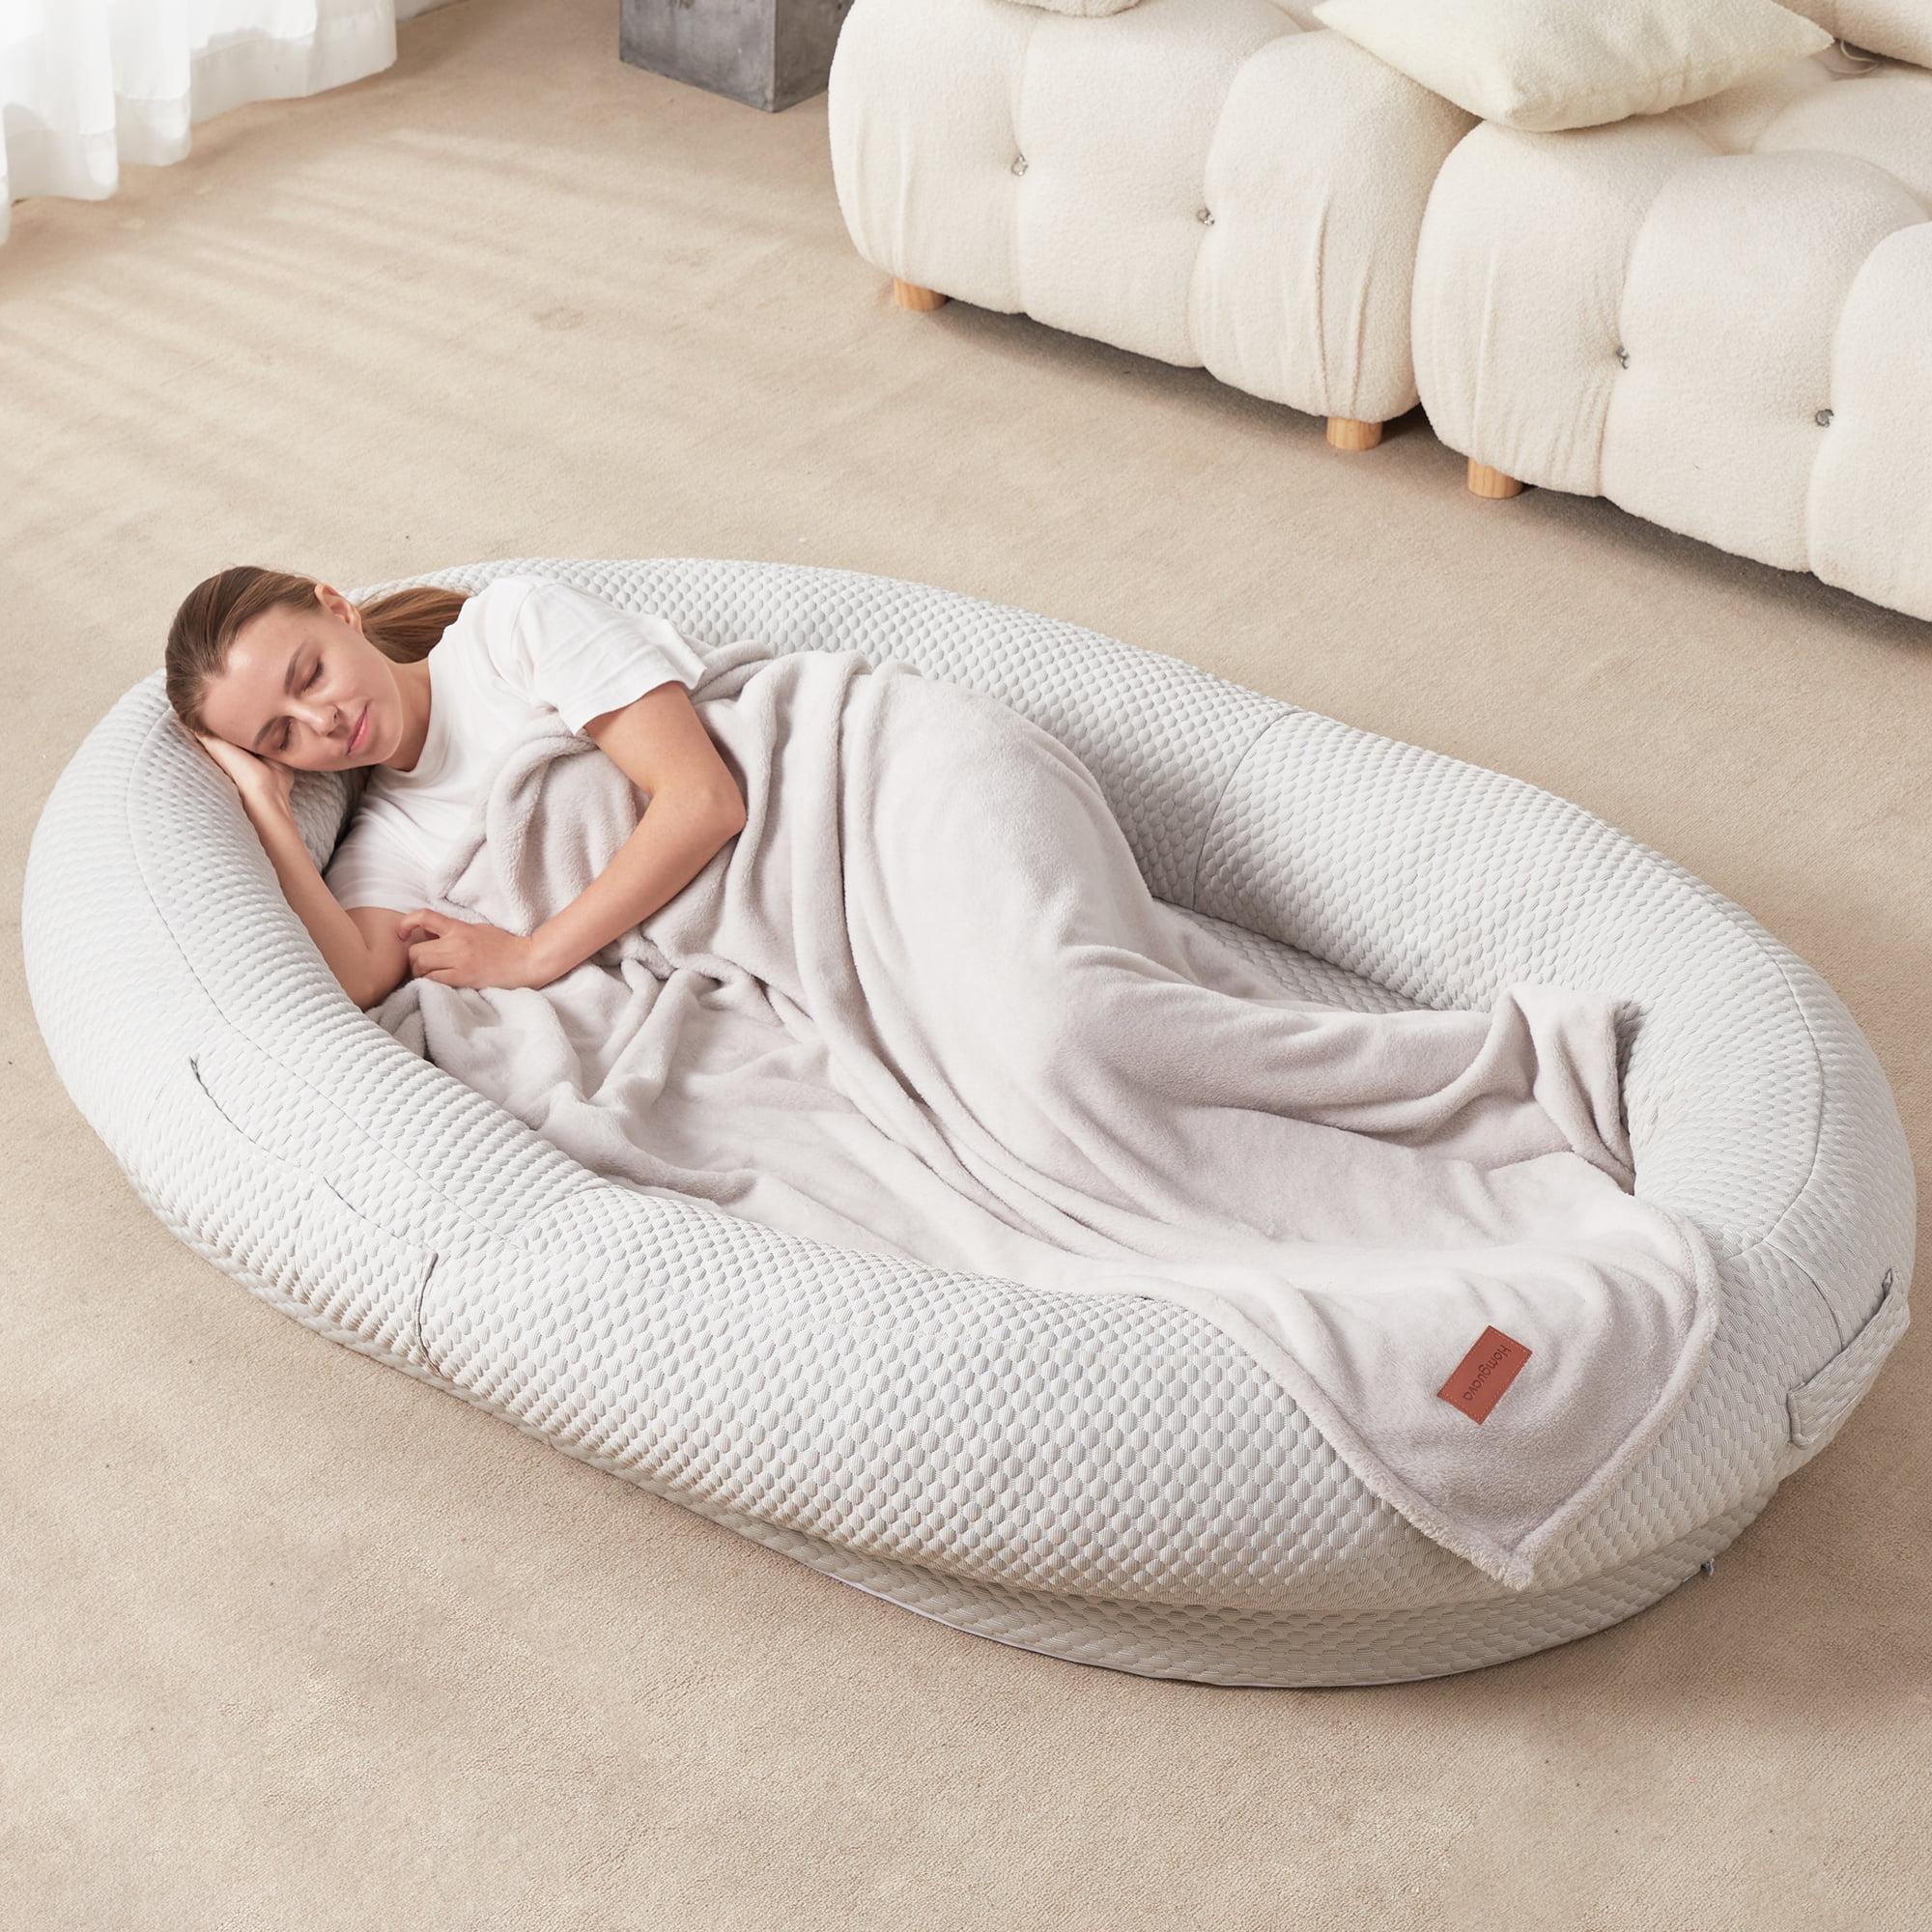 Big Bean Bag Chair with Memory Foam Filling 4 feet for Adult Child Giant  Sofa Velvet Lazy Sofa Machine Washable Covers, Living Room Furniture Gray -  Walmart.com